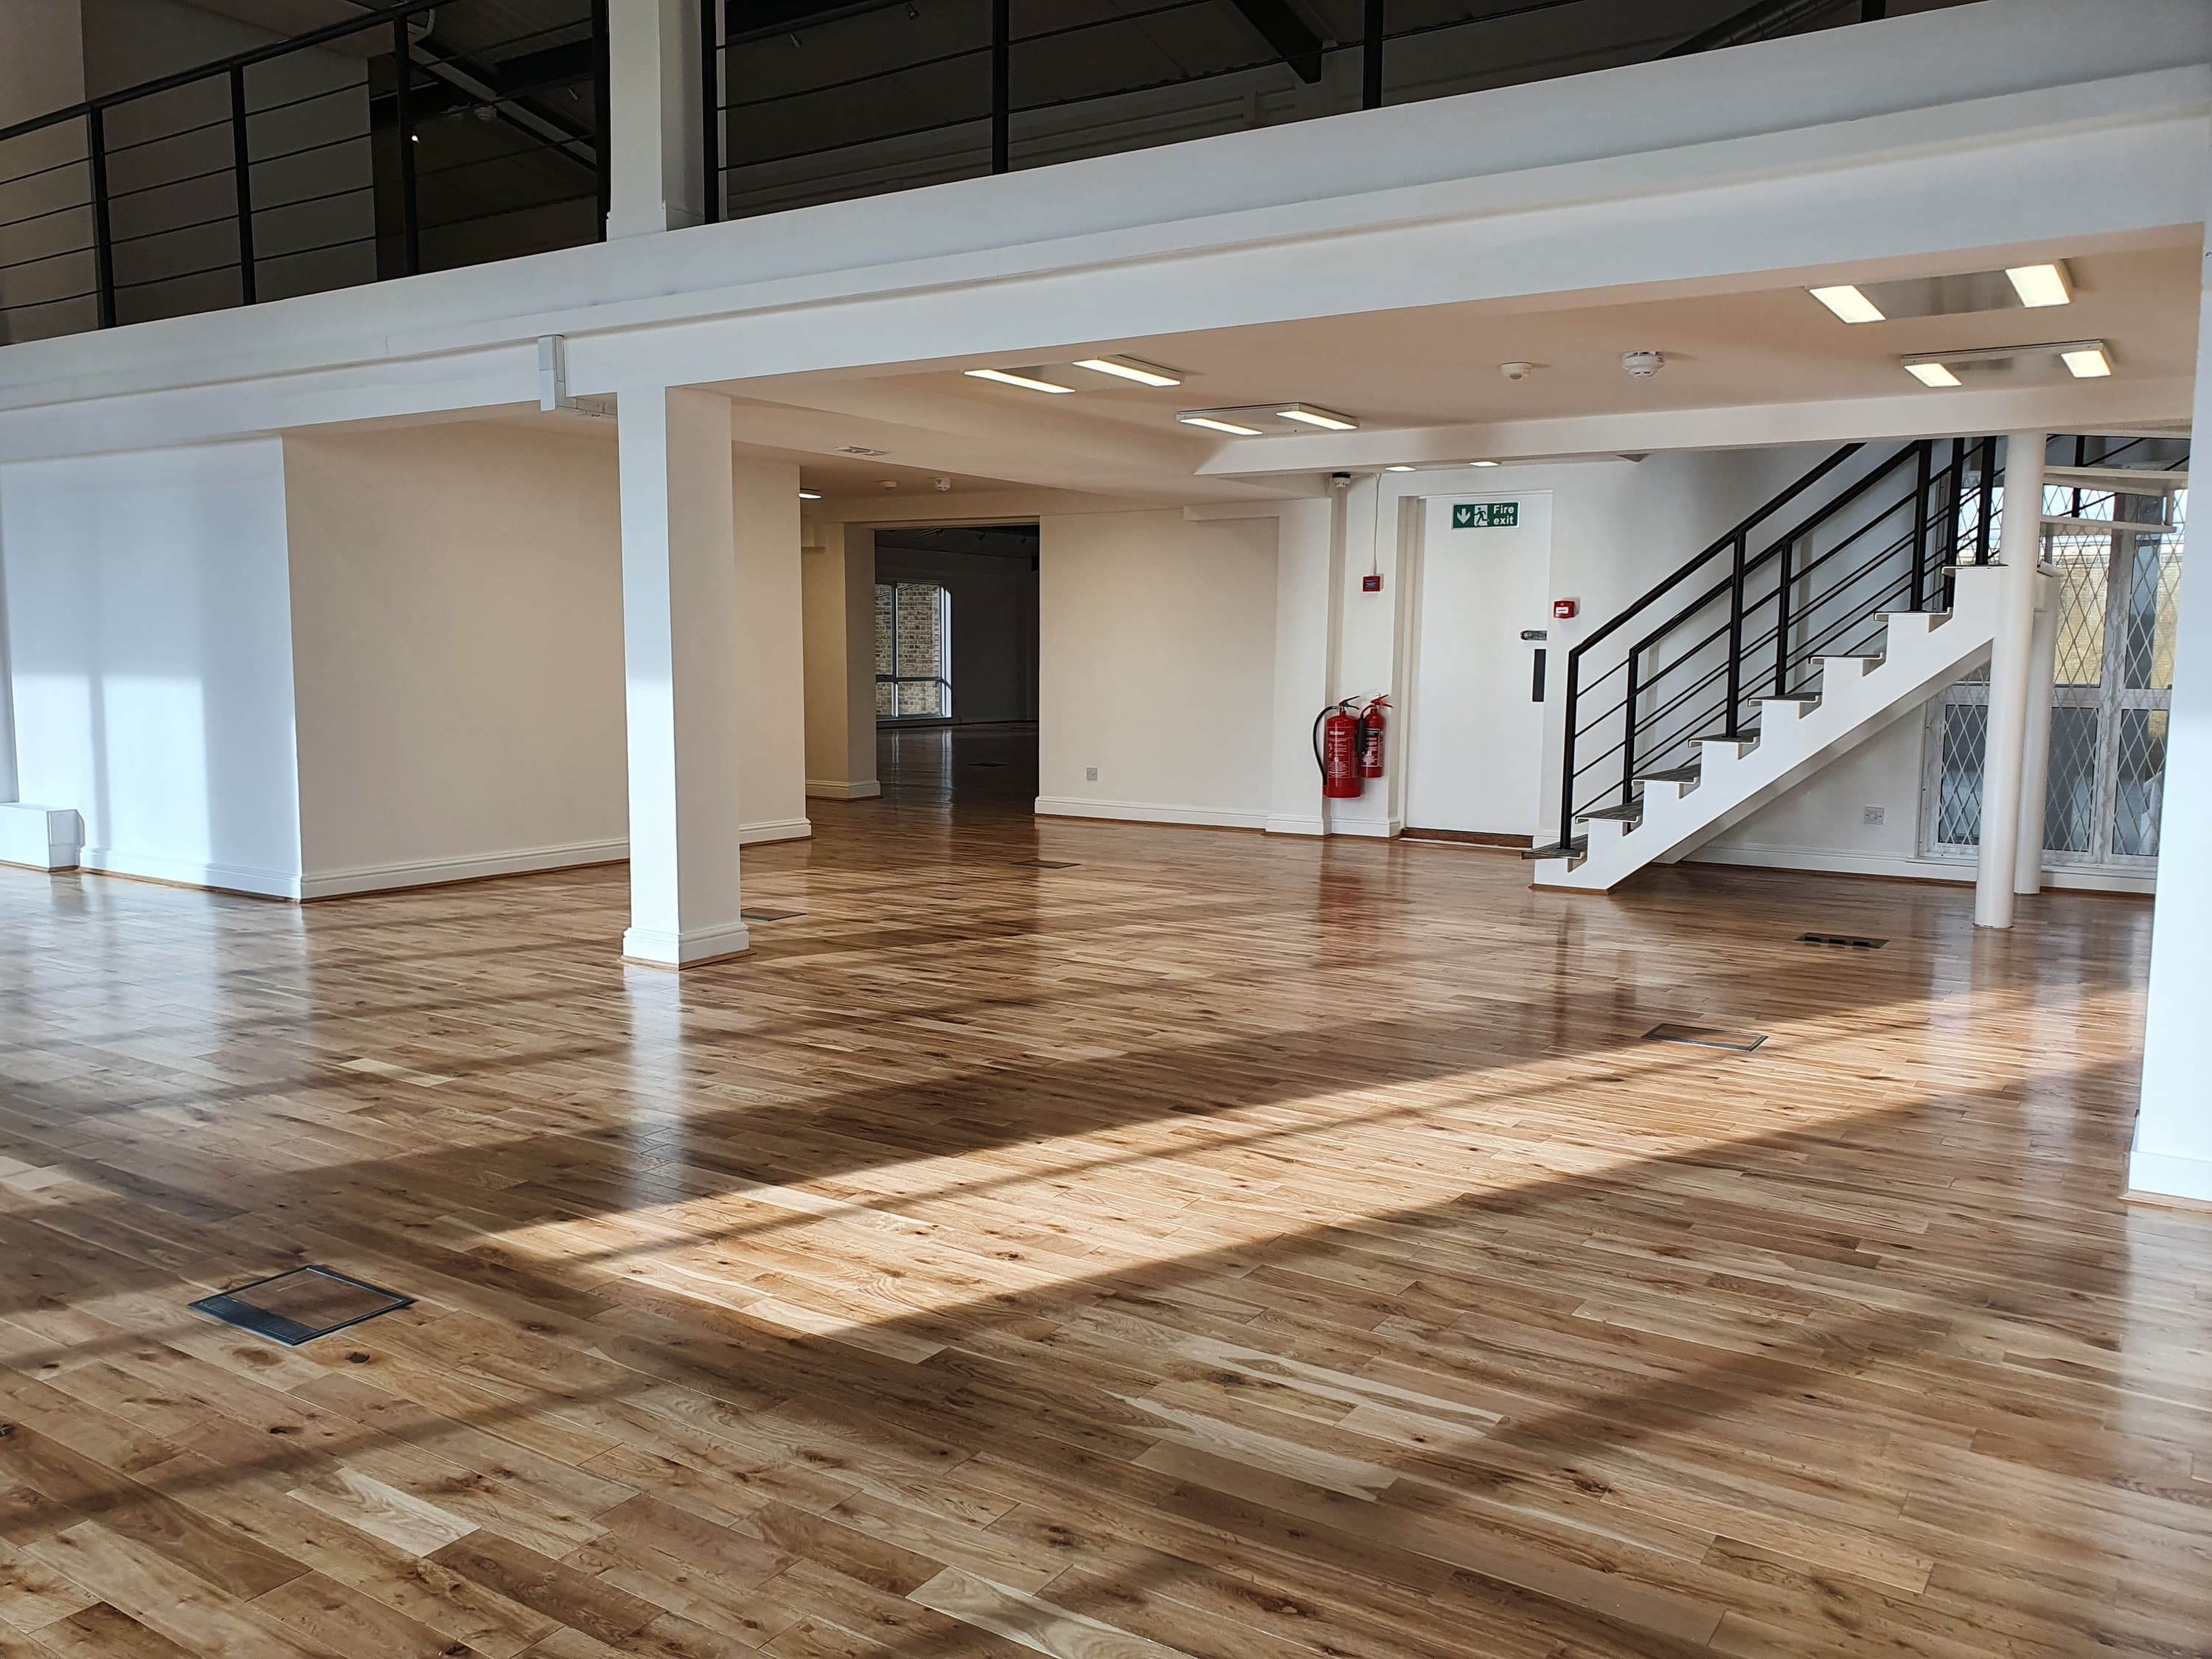 Totally clear empty office space with wood floor and mezzanine